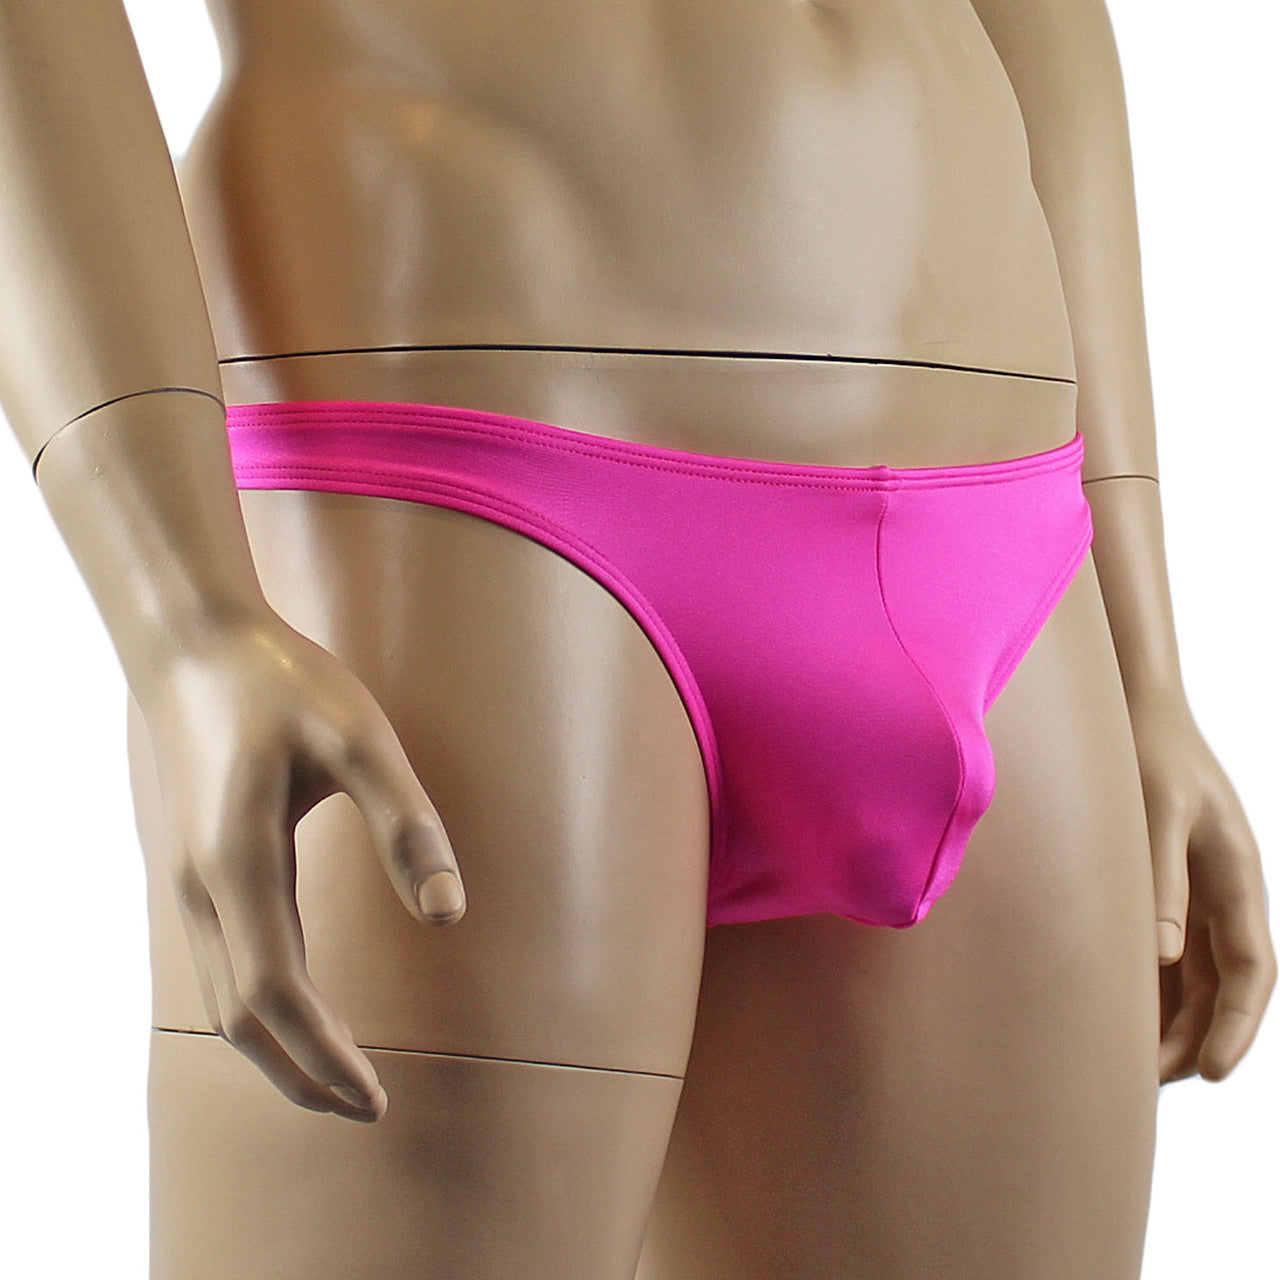 Mens Thong Underwear Wide Front or Narrow Front (hot pink plus other colours)